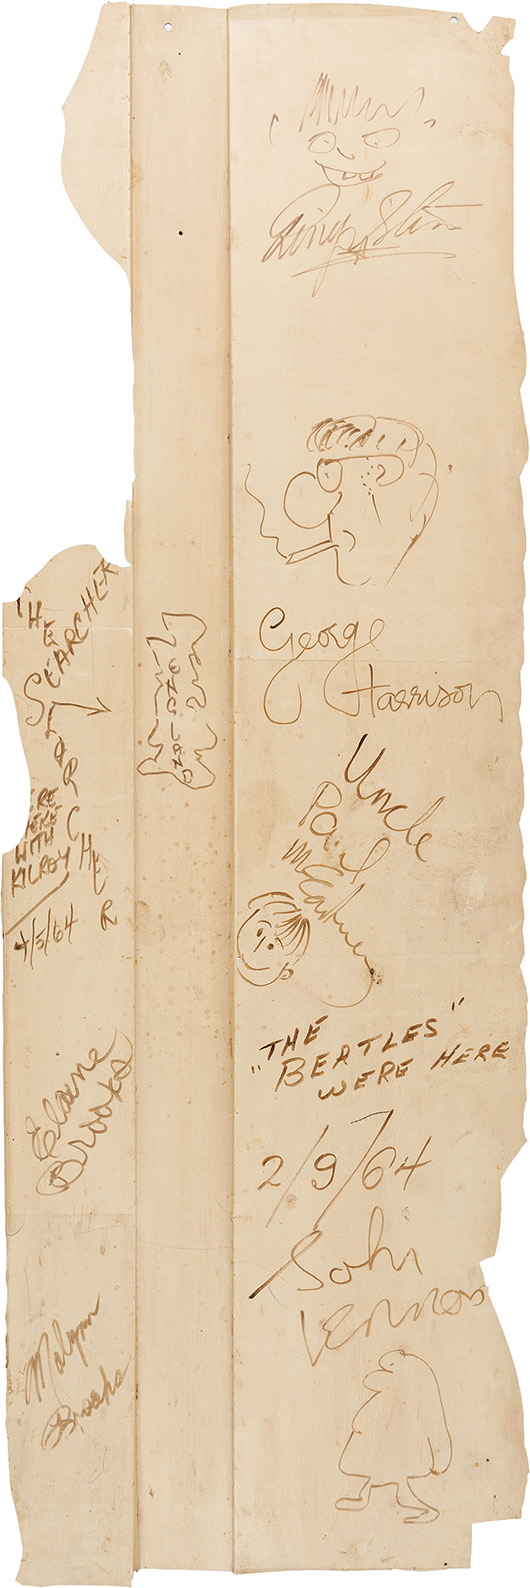 Beatles signed (with individual drawings) stage wall section from Feb. 9, 1964, appearance on the ‘Ed Sullivan Show,’ approximately 16 inches by 48 inches. Estimate: more than $800,000. Heritage Auctions image.